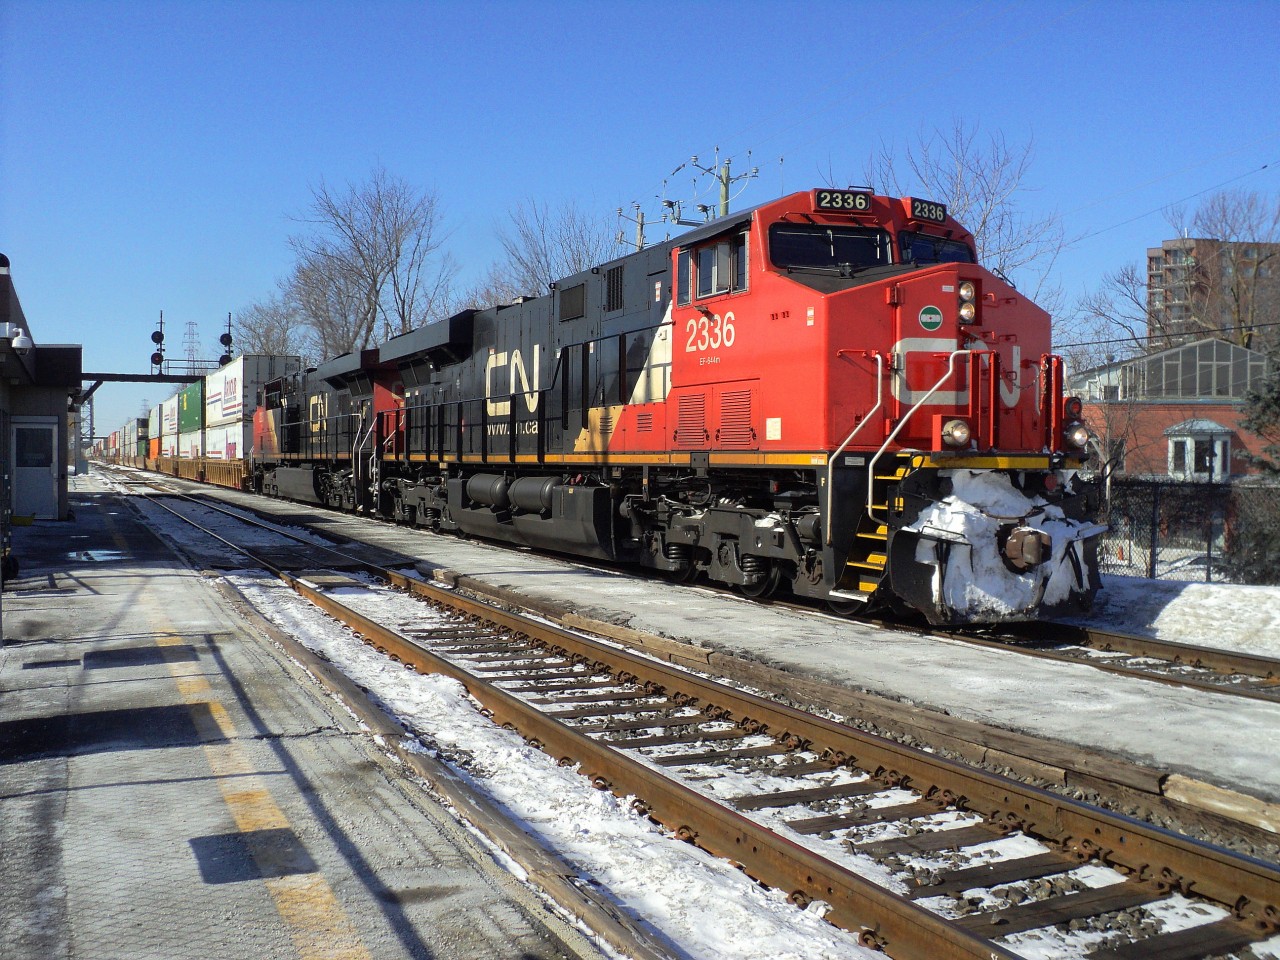 CN-2336 leading loco follow of CN-2237 both ES-44-DC a convoy of containers going in the Maritimes on CN-rte 120 passing by St-Lambert on a nice sunny and cold day -17C was about 12,000 feets